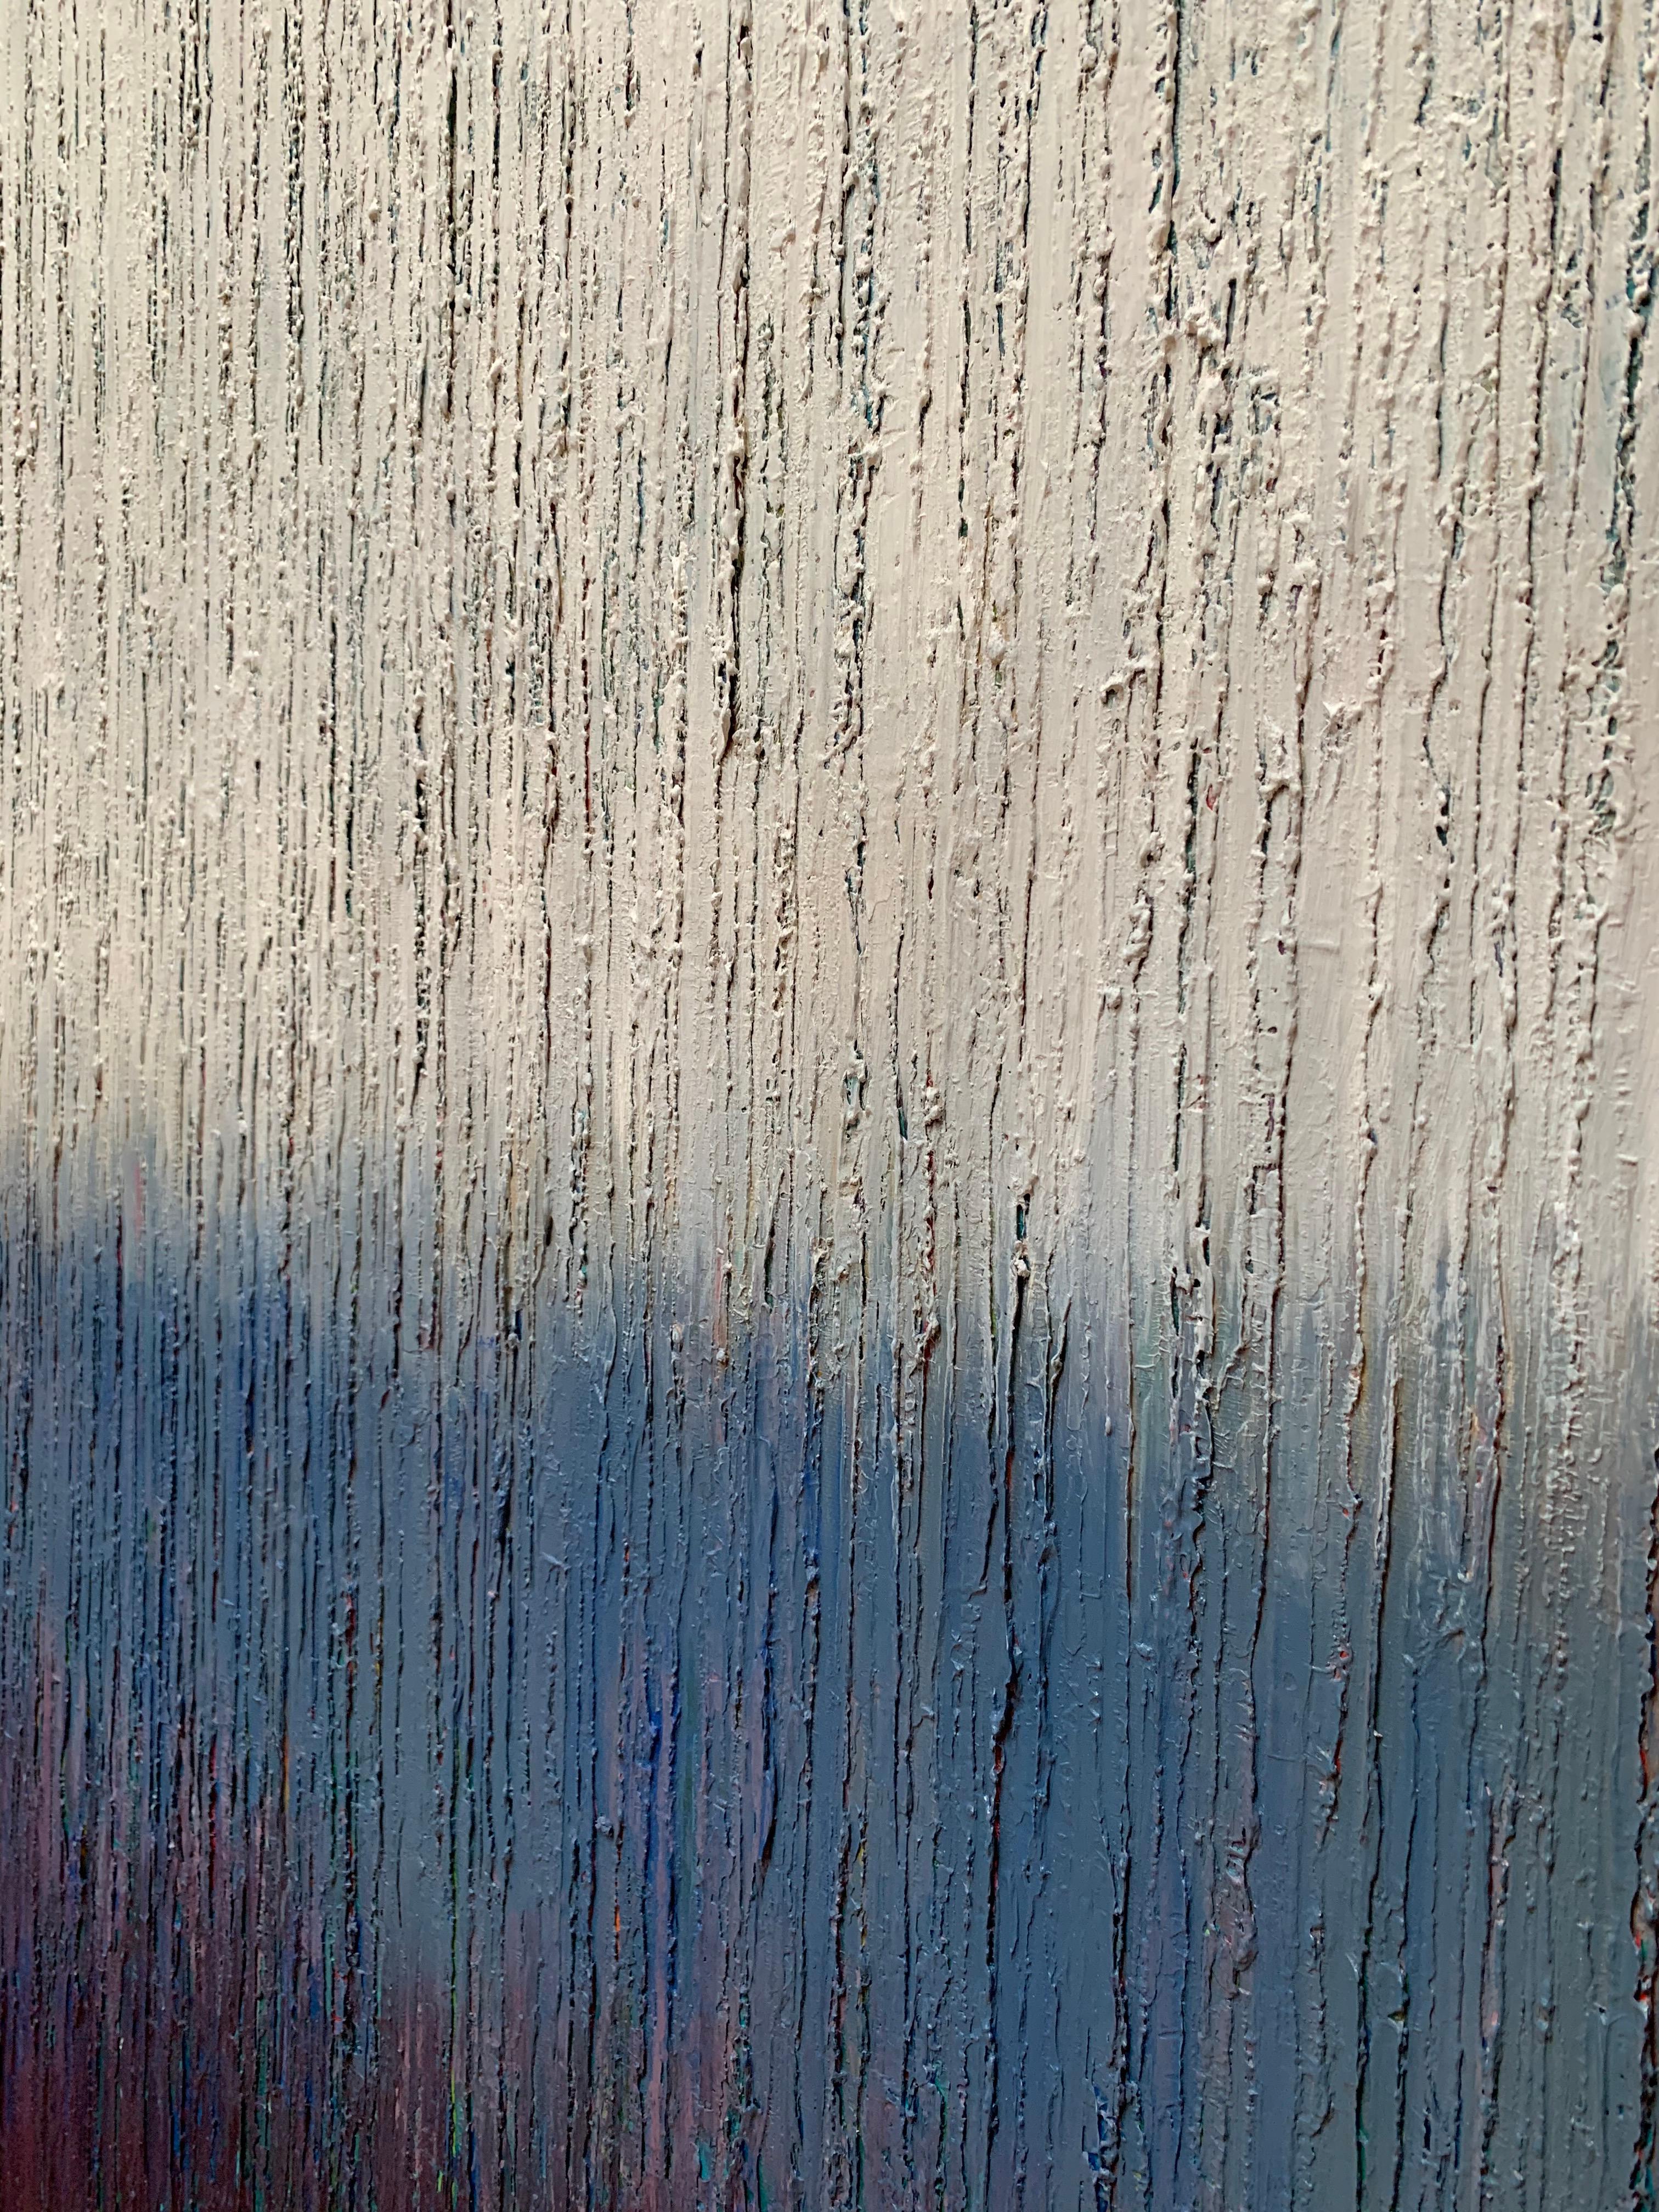 <p>Artist Comments<br>An intricately textured abstract painting featuring rich gradations of color. Artist Janet Hamilton applied oil paint using palette knives to develop the channeled surface of the work, giving the piece the feeling of rain